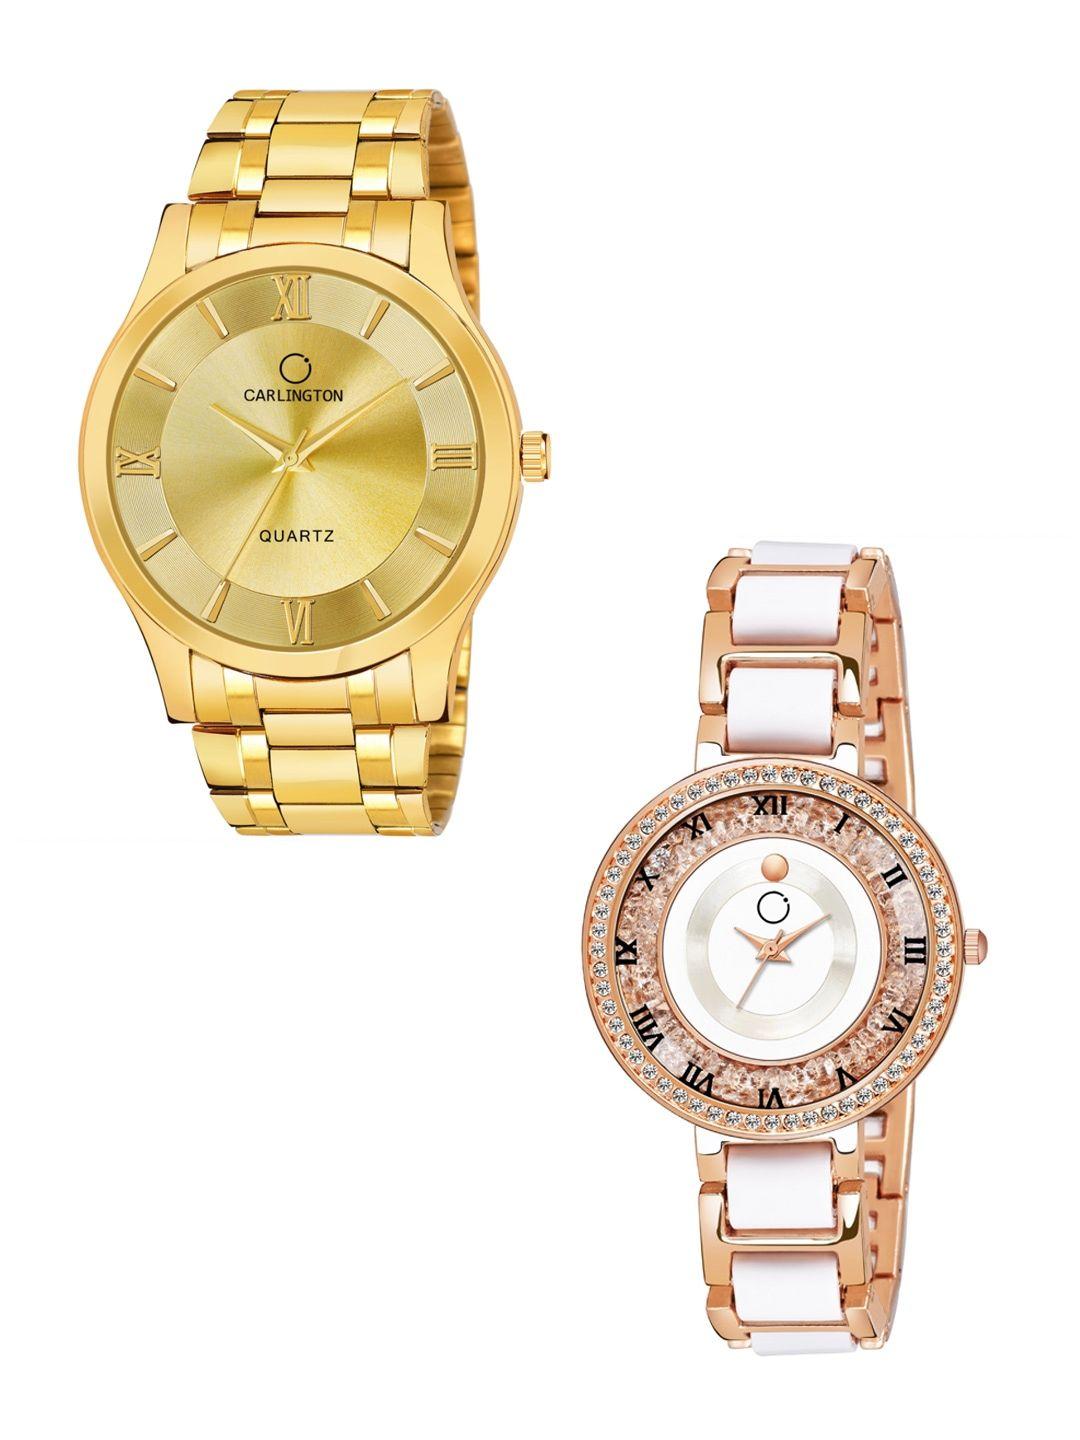 carlington his & her  analogue watch gift set  ct-6130gg